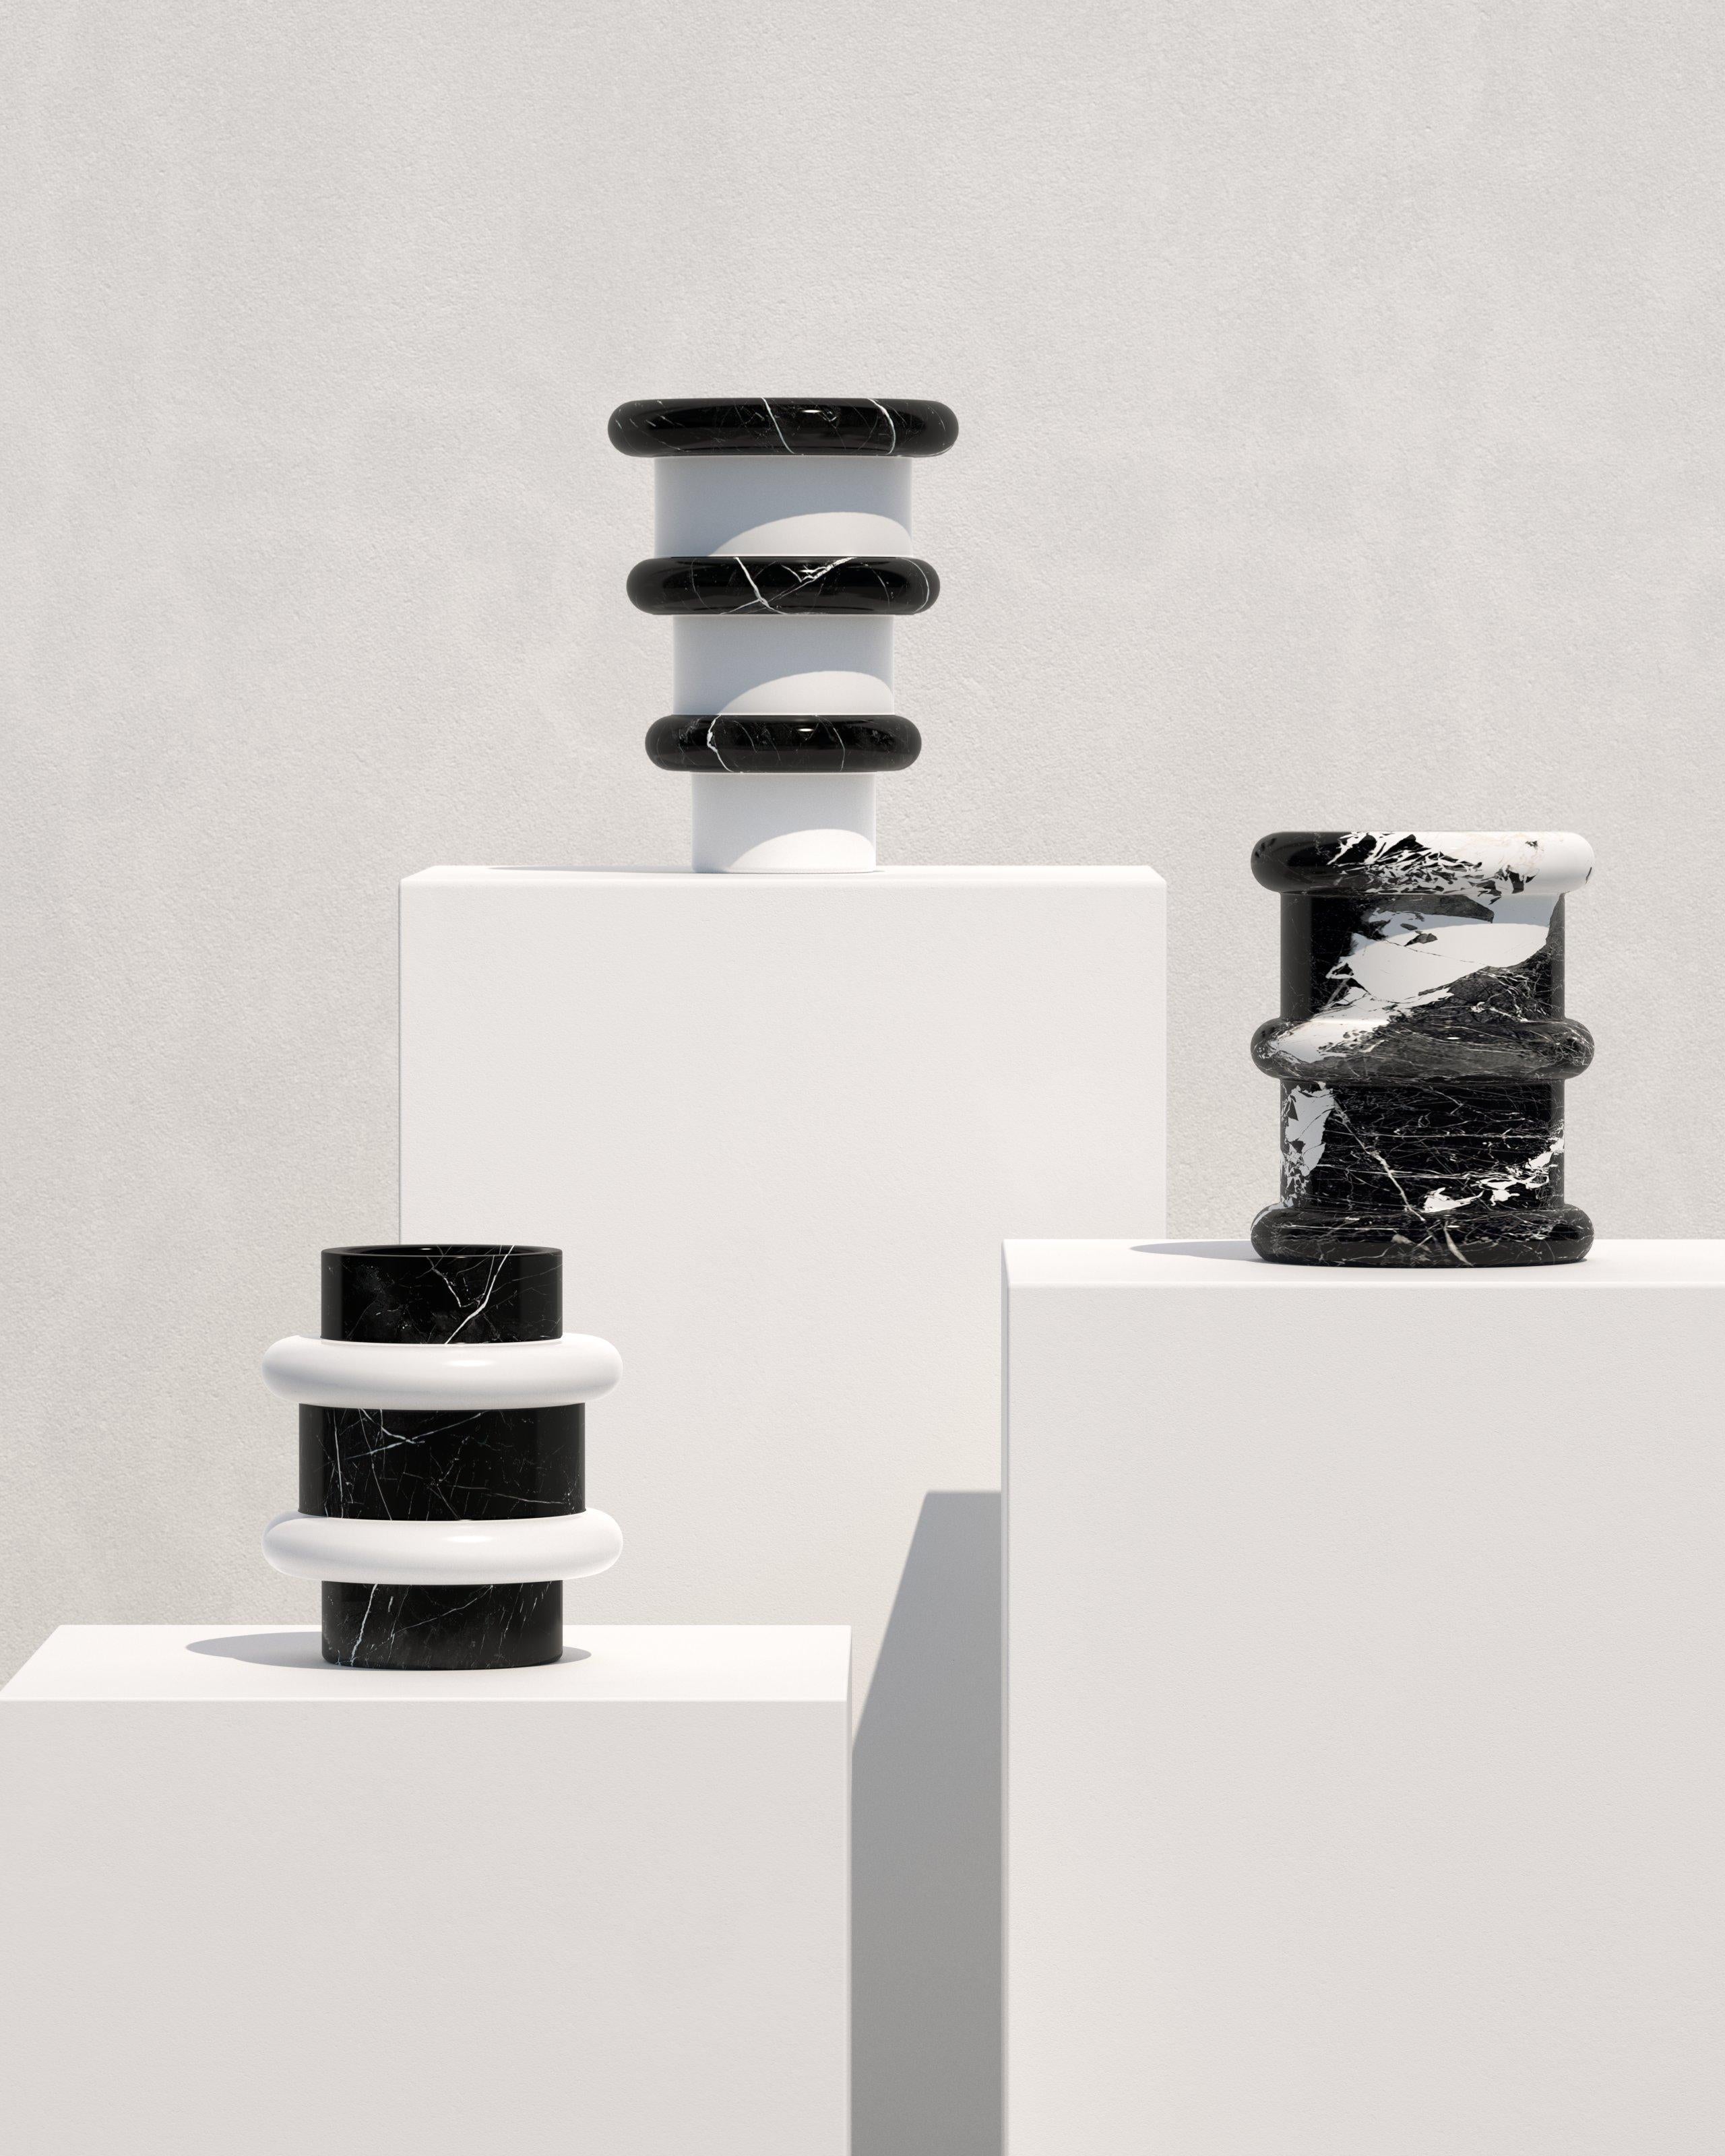 This minimalistic and playful vase in a bold black and white marble combination is a perfect item to add an authentic accent to any interior space. Made in Italy from natural marble, the Lumière vases offer playful shapes, clean silhouettes and high